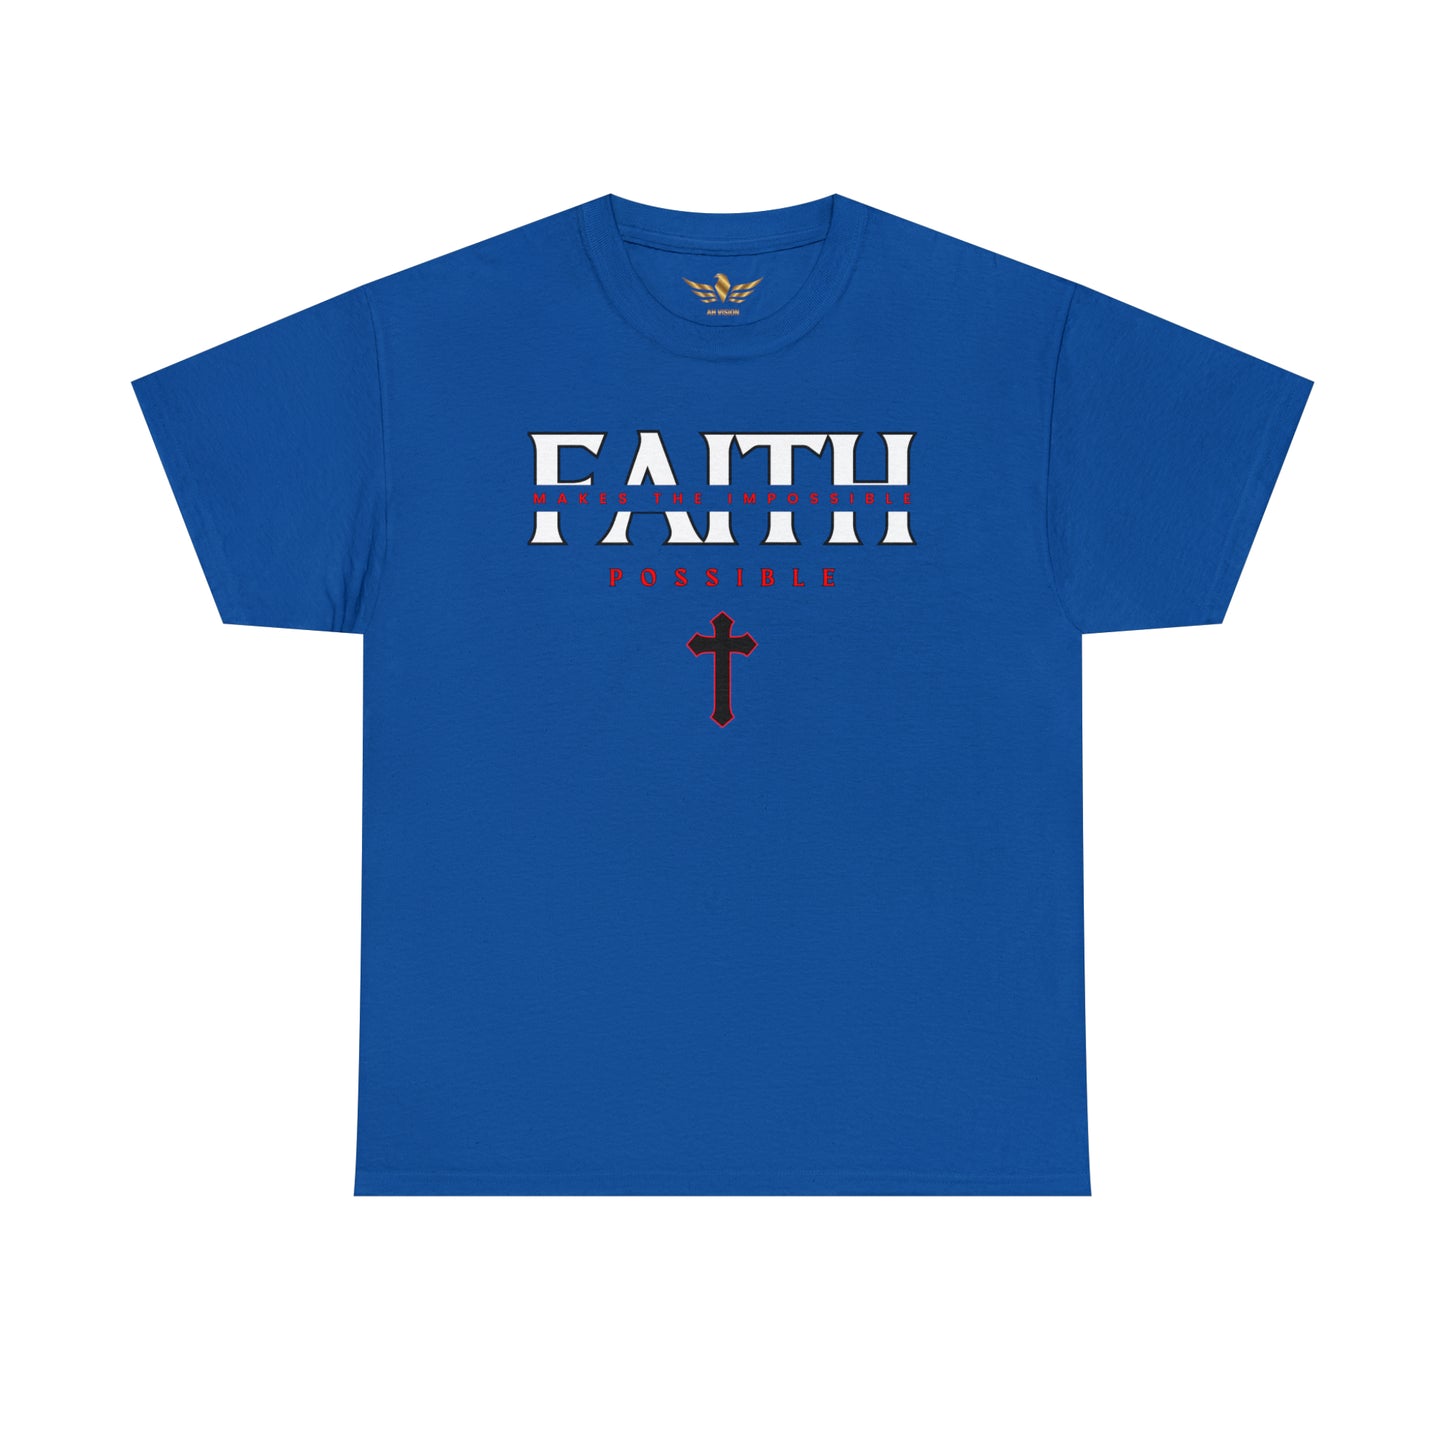 Faith Makes The Impossible Possible Unisex Tee Sizes 4XL - 5XL - AH VISION